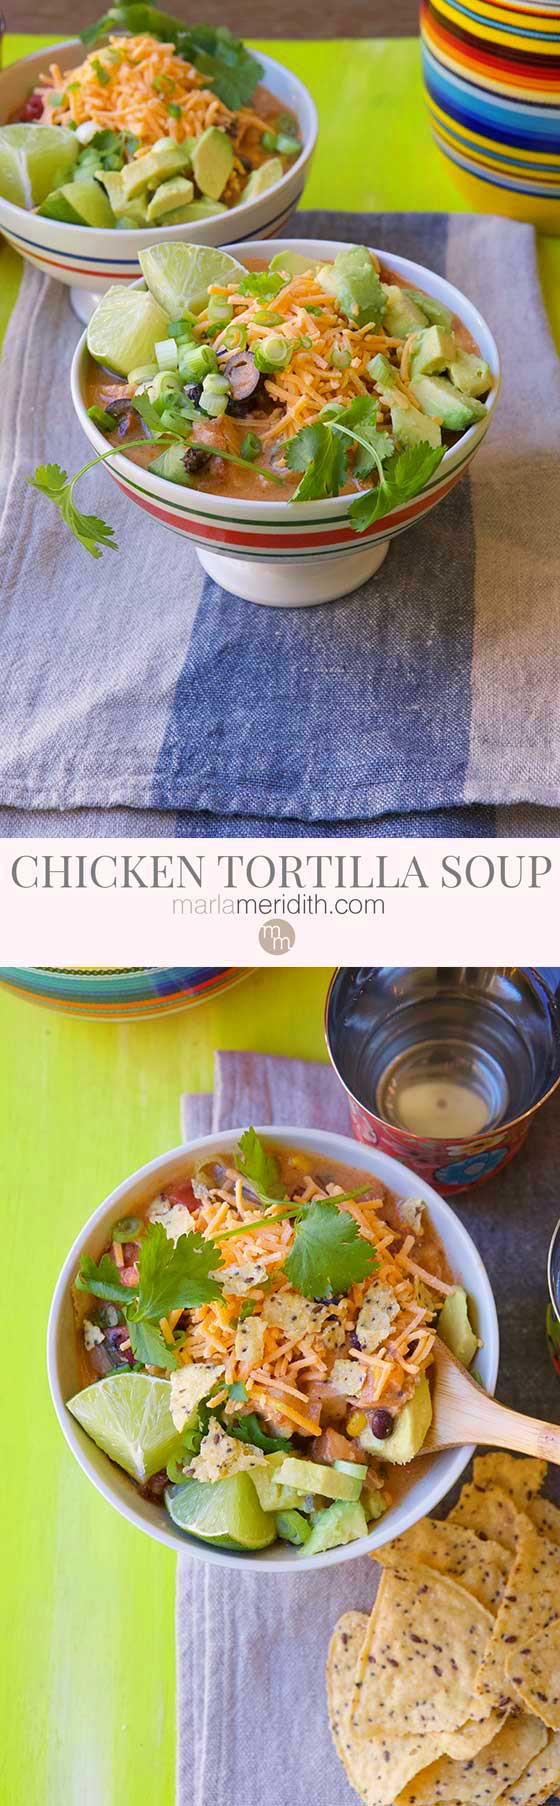 Make a batch of this soul warming Chipotle Chicken Tortilla Soup recipe, a hearty, delicious meal for the entire family. MarlaMeridith.com